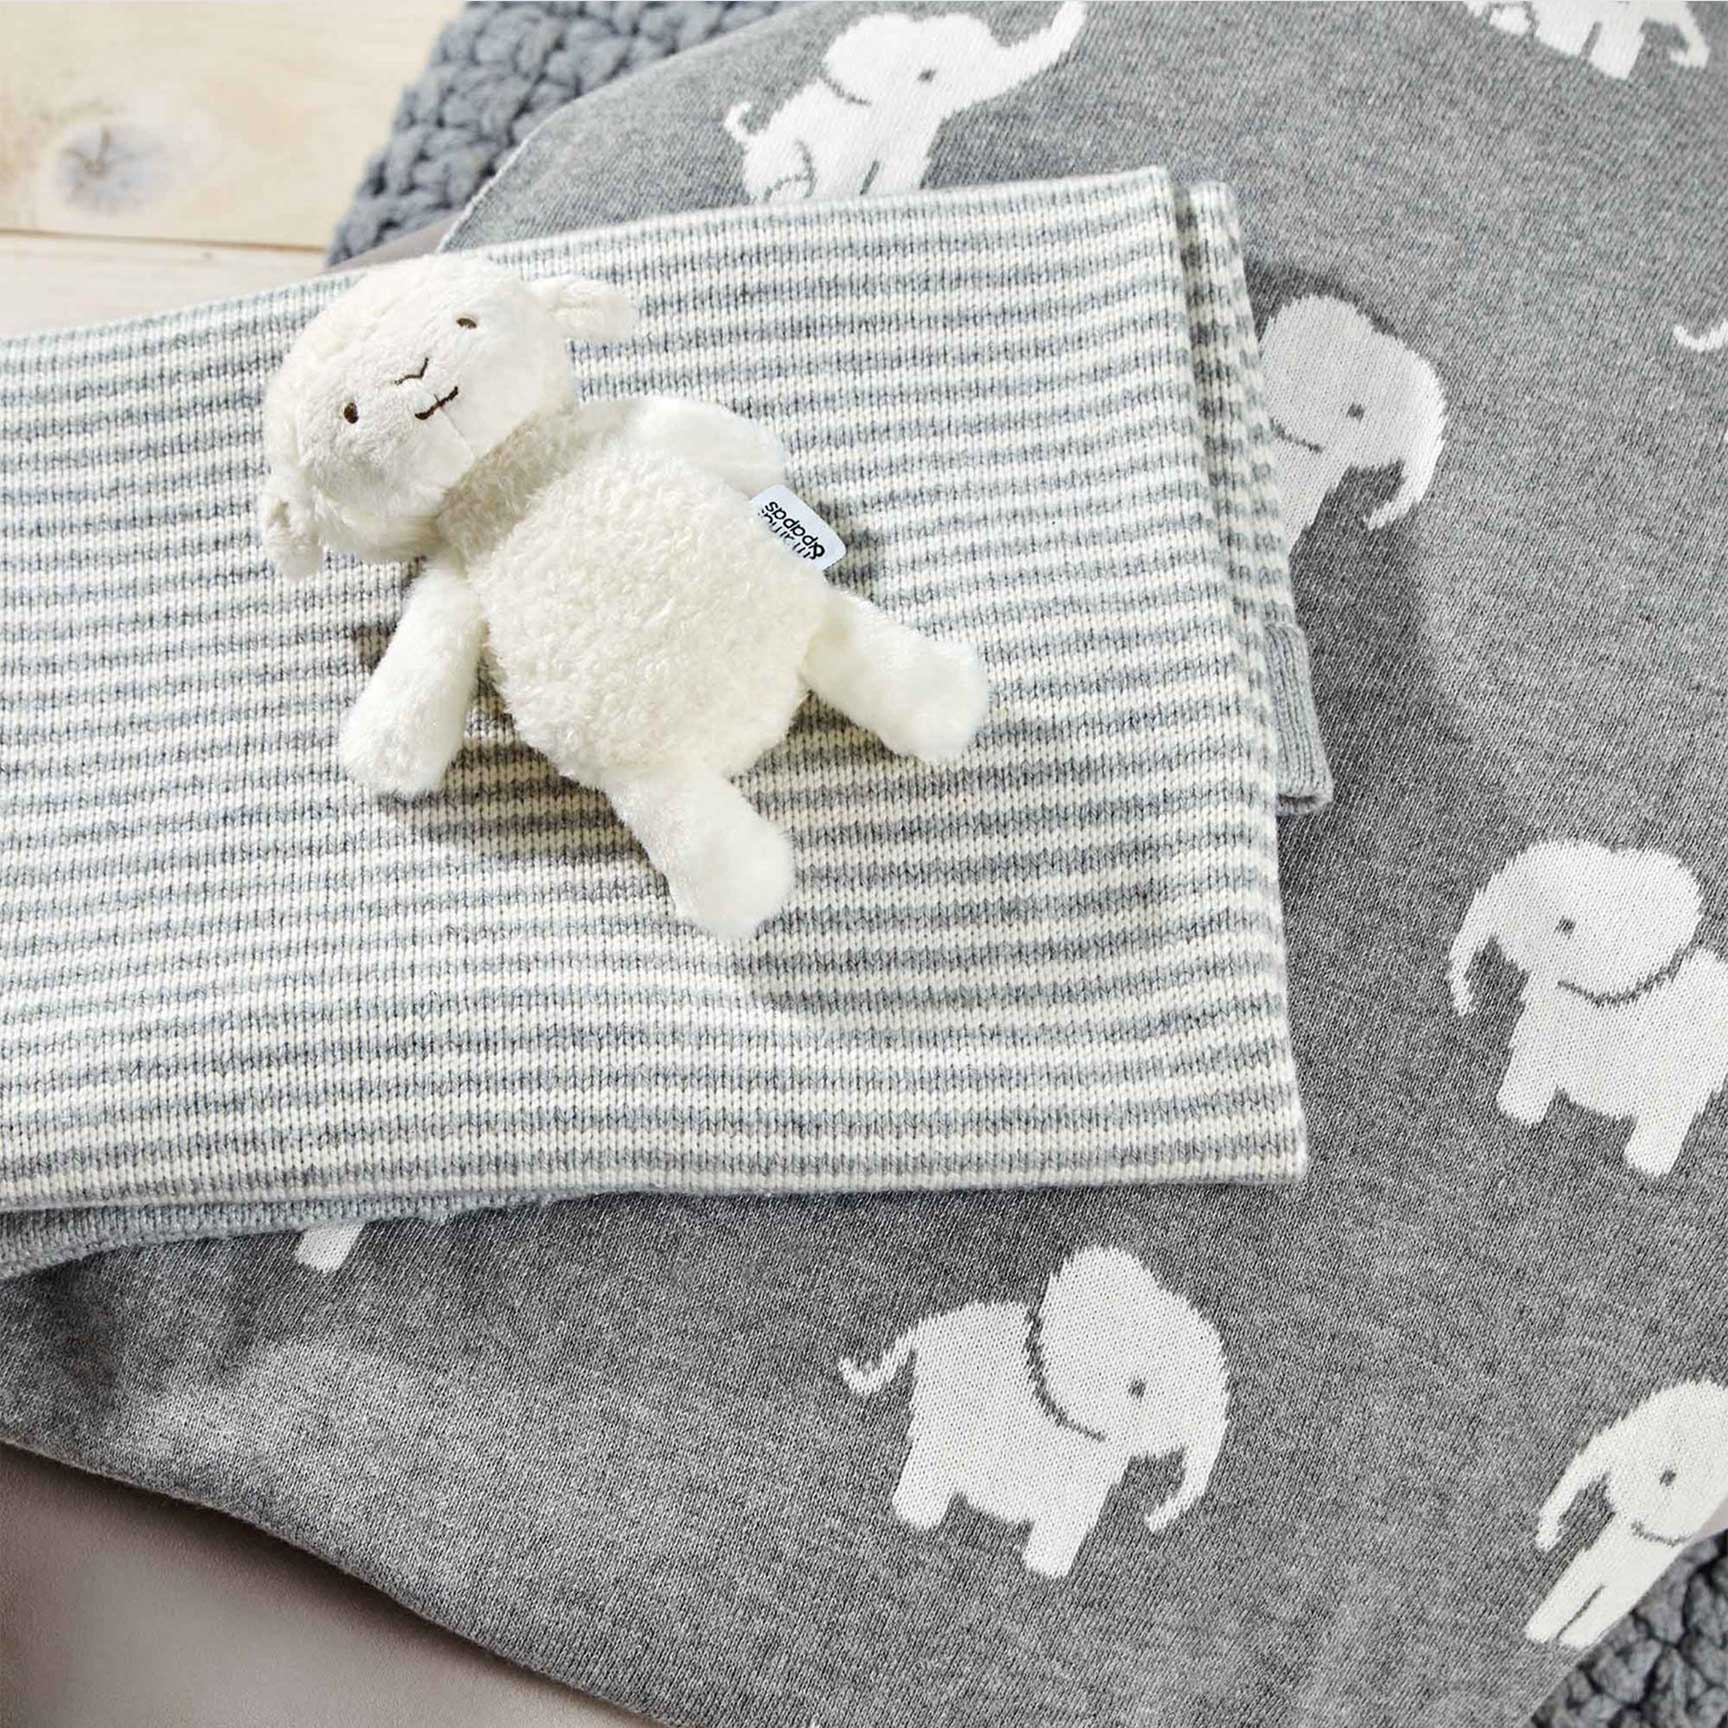 Mamas & Papas Welcome To The World Knitted Elephant Blanket in Grey Cot & Cot Bed Blankets